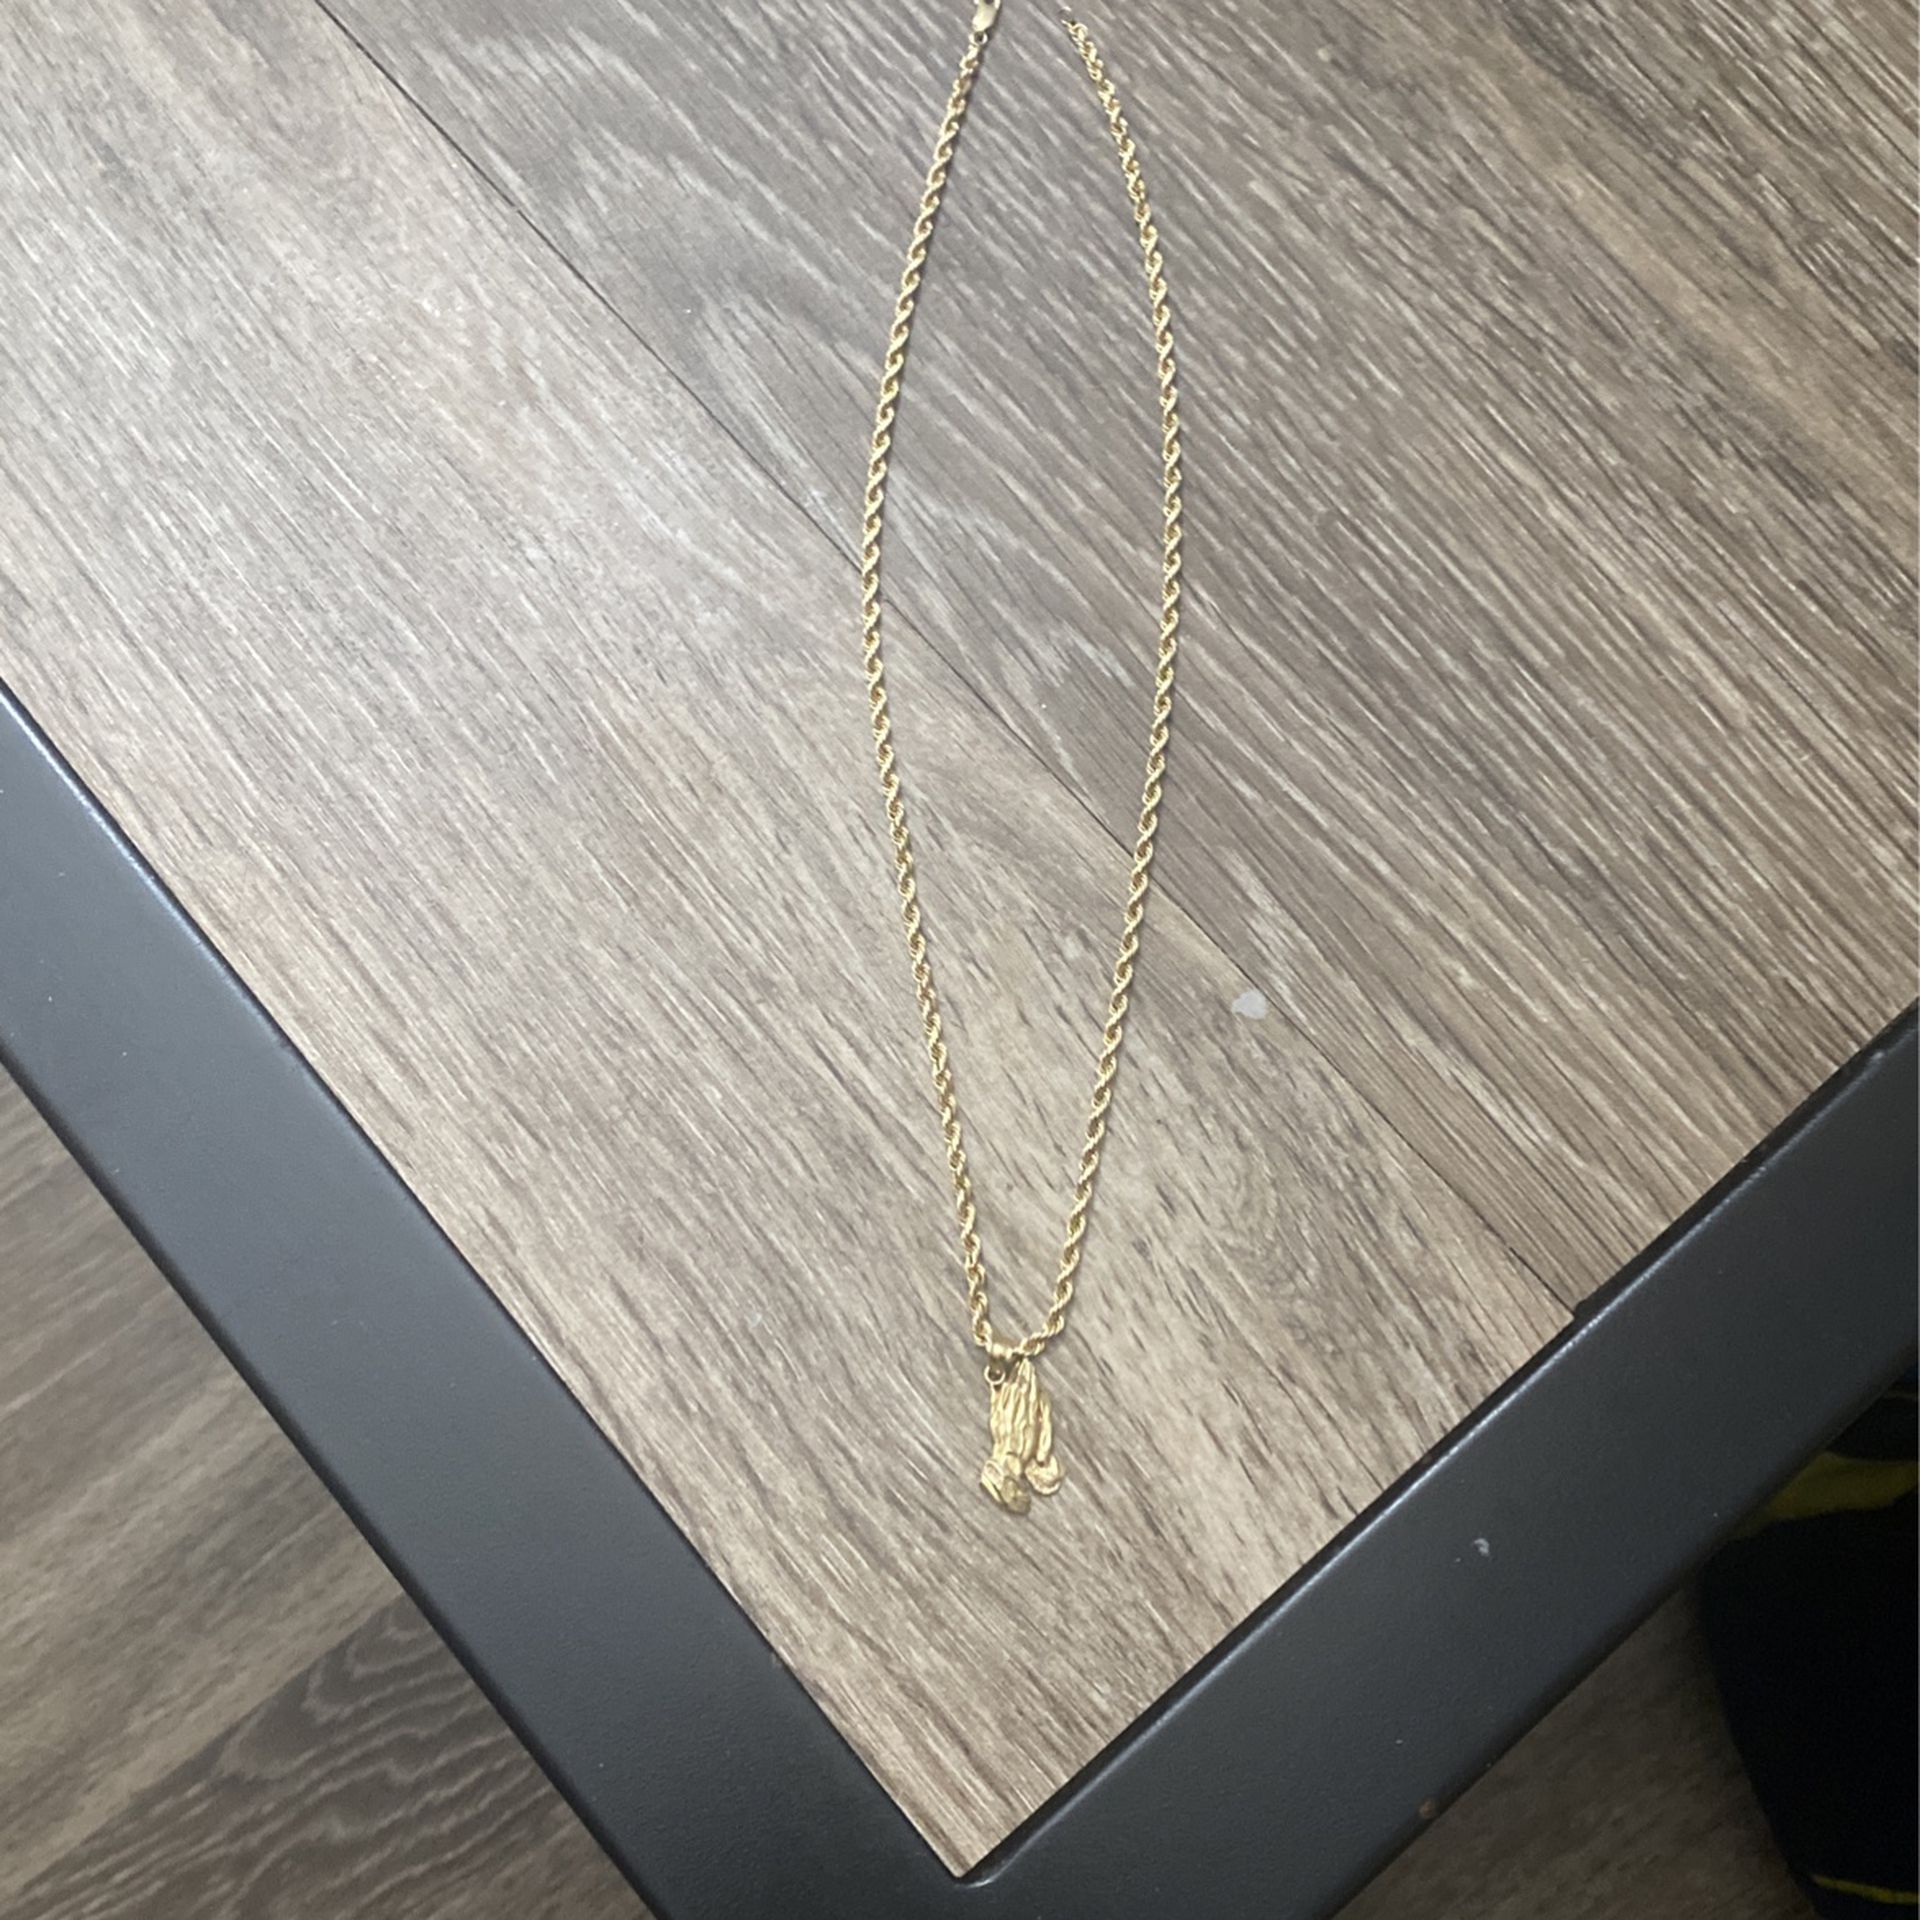 10k Solid Gold Rope Chain With 10k Pendent 